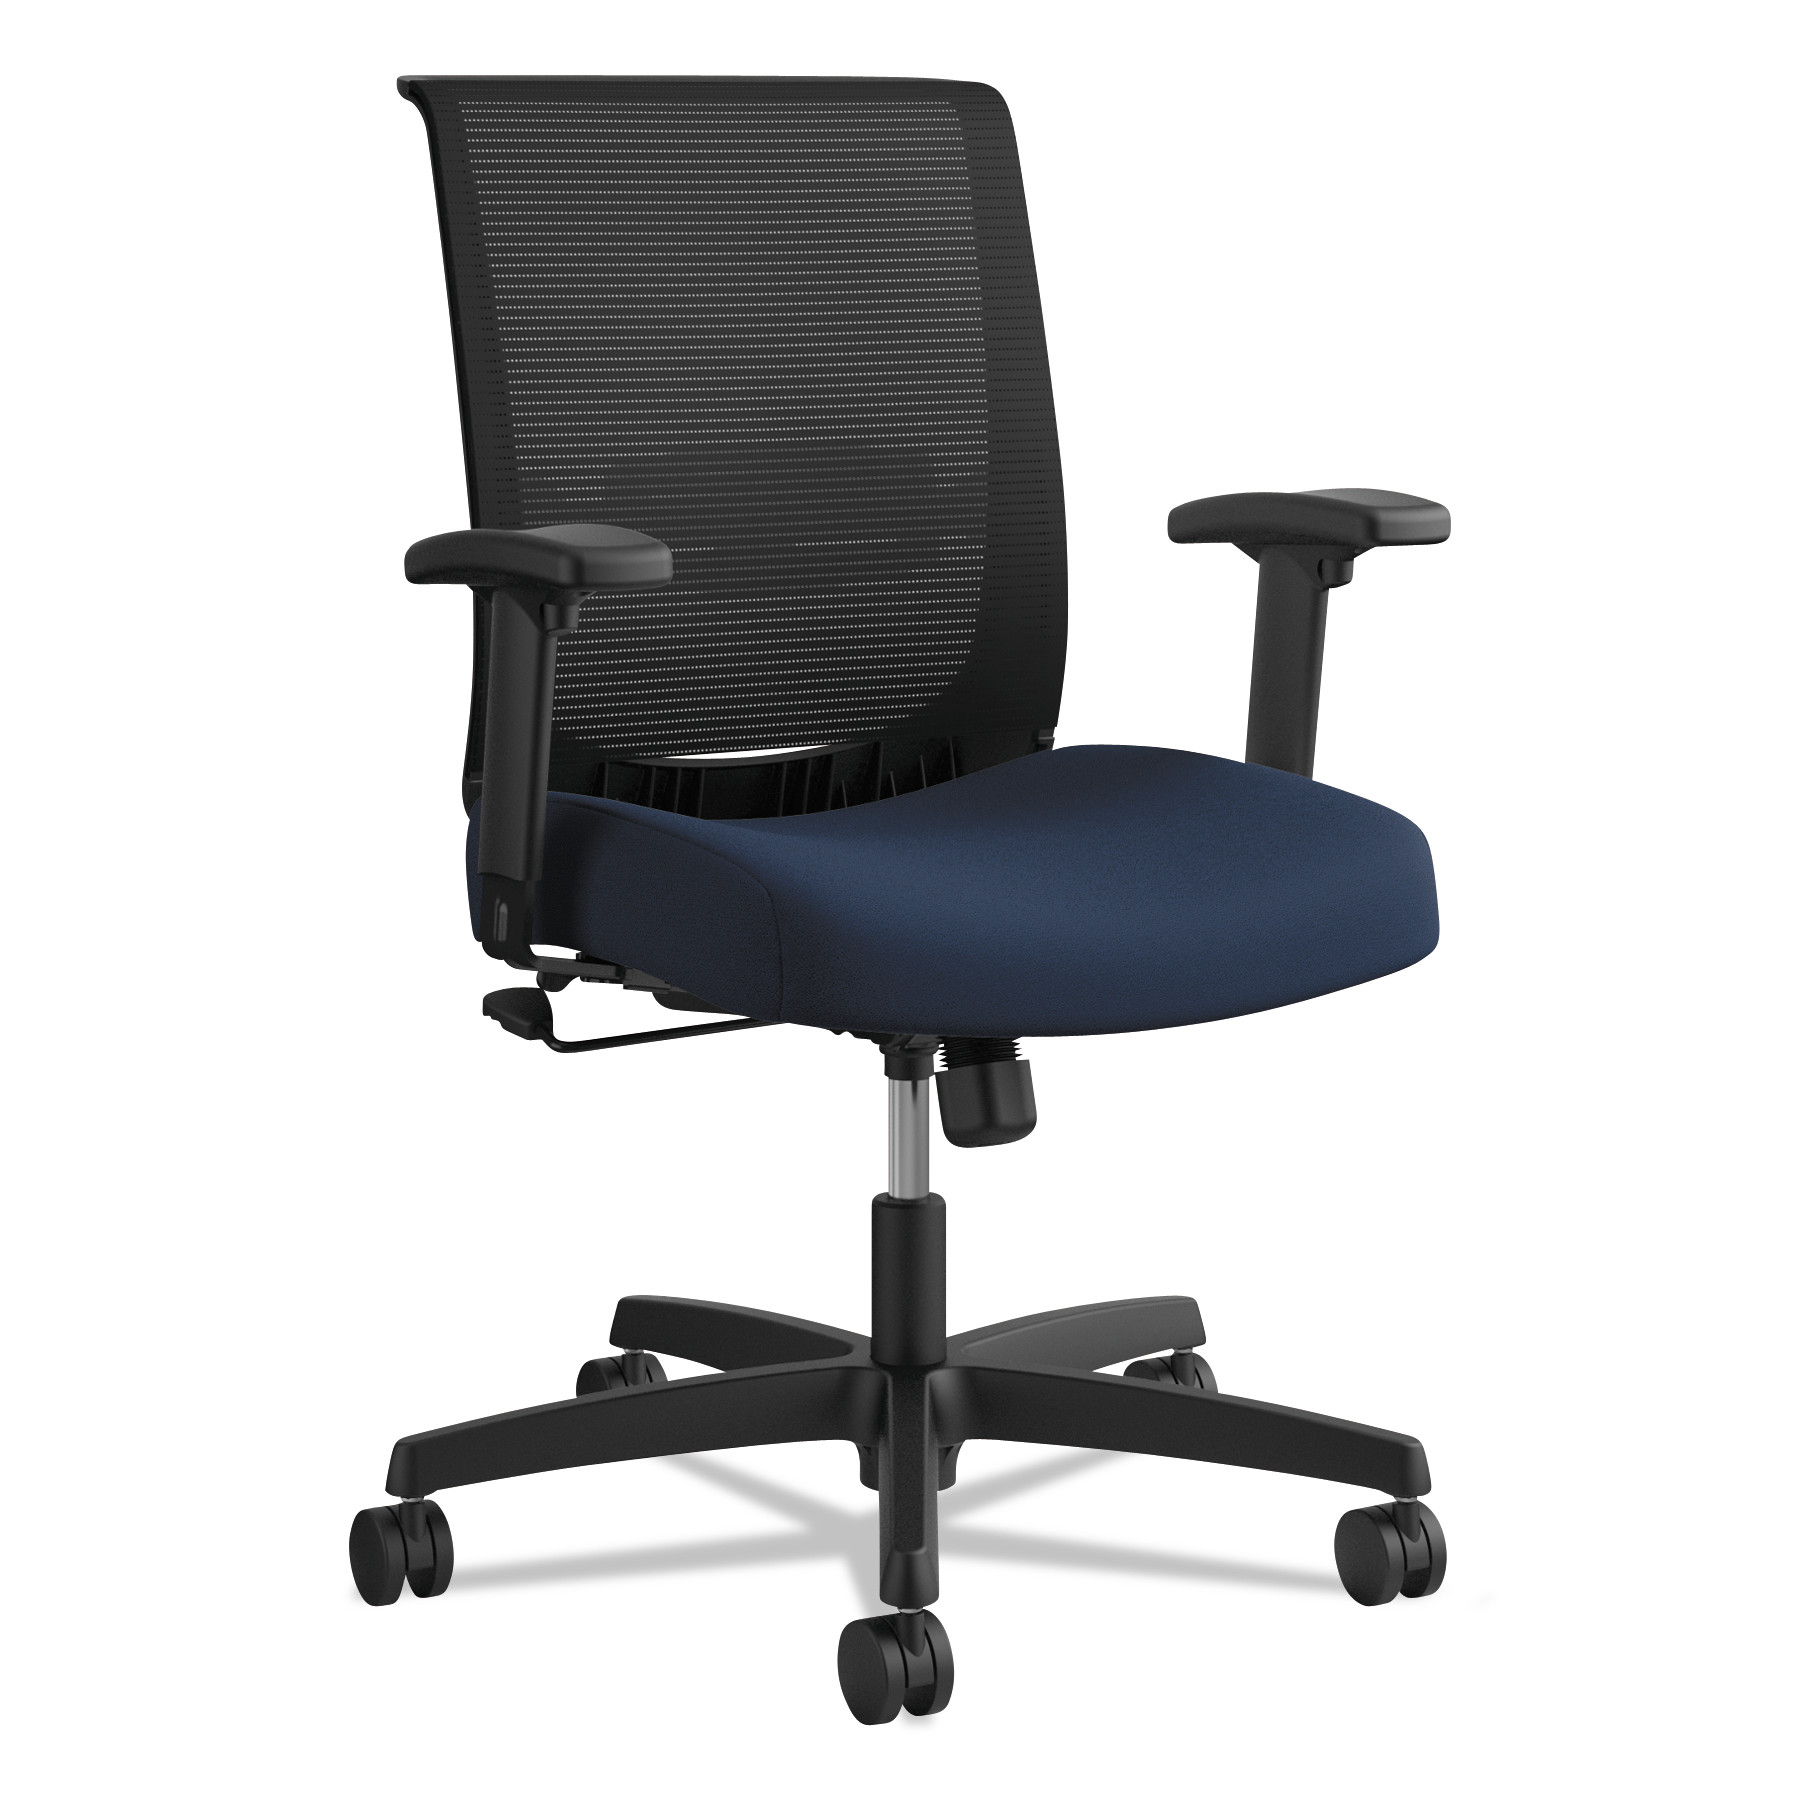  HON HONCMZ1ACU98 Convergence Mid-Back Task Chair with Swivel-Tilt Control, Supports up to 275 lbs, Navy Seat, Black Back, Black Base (HONCMZ1ACU98) 